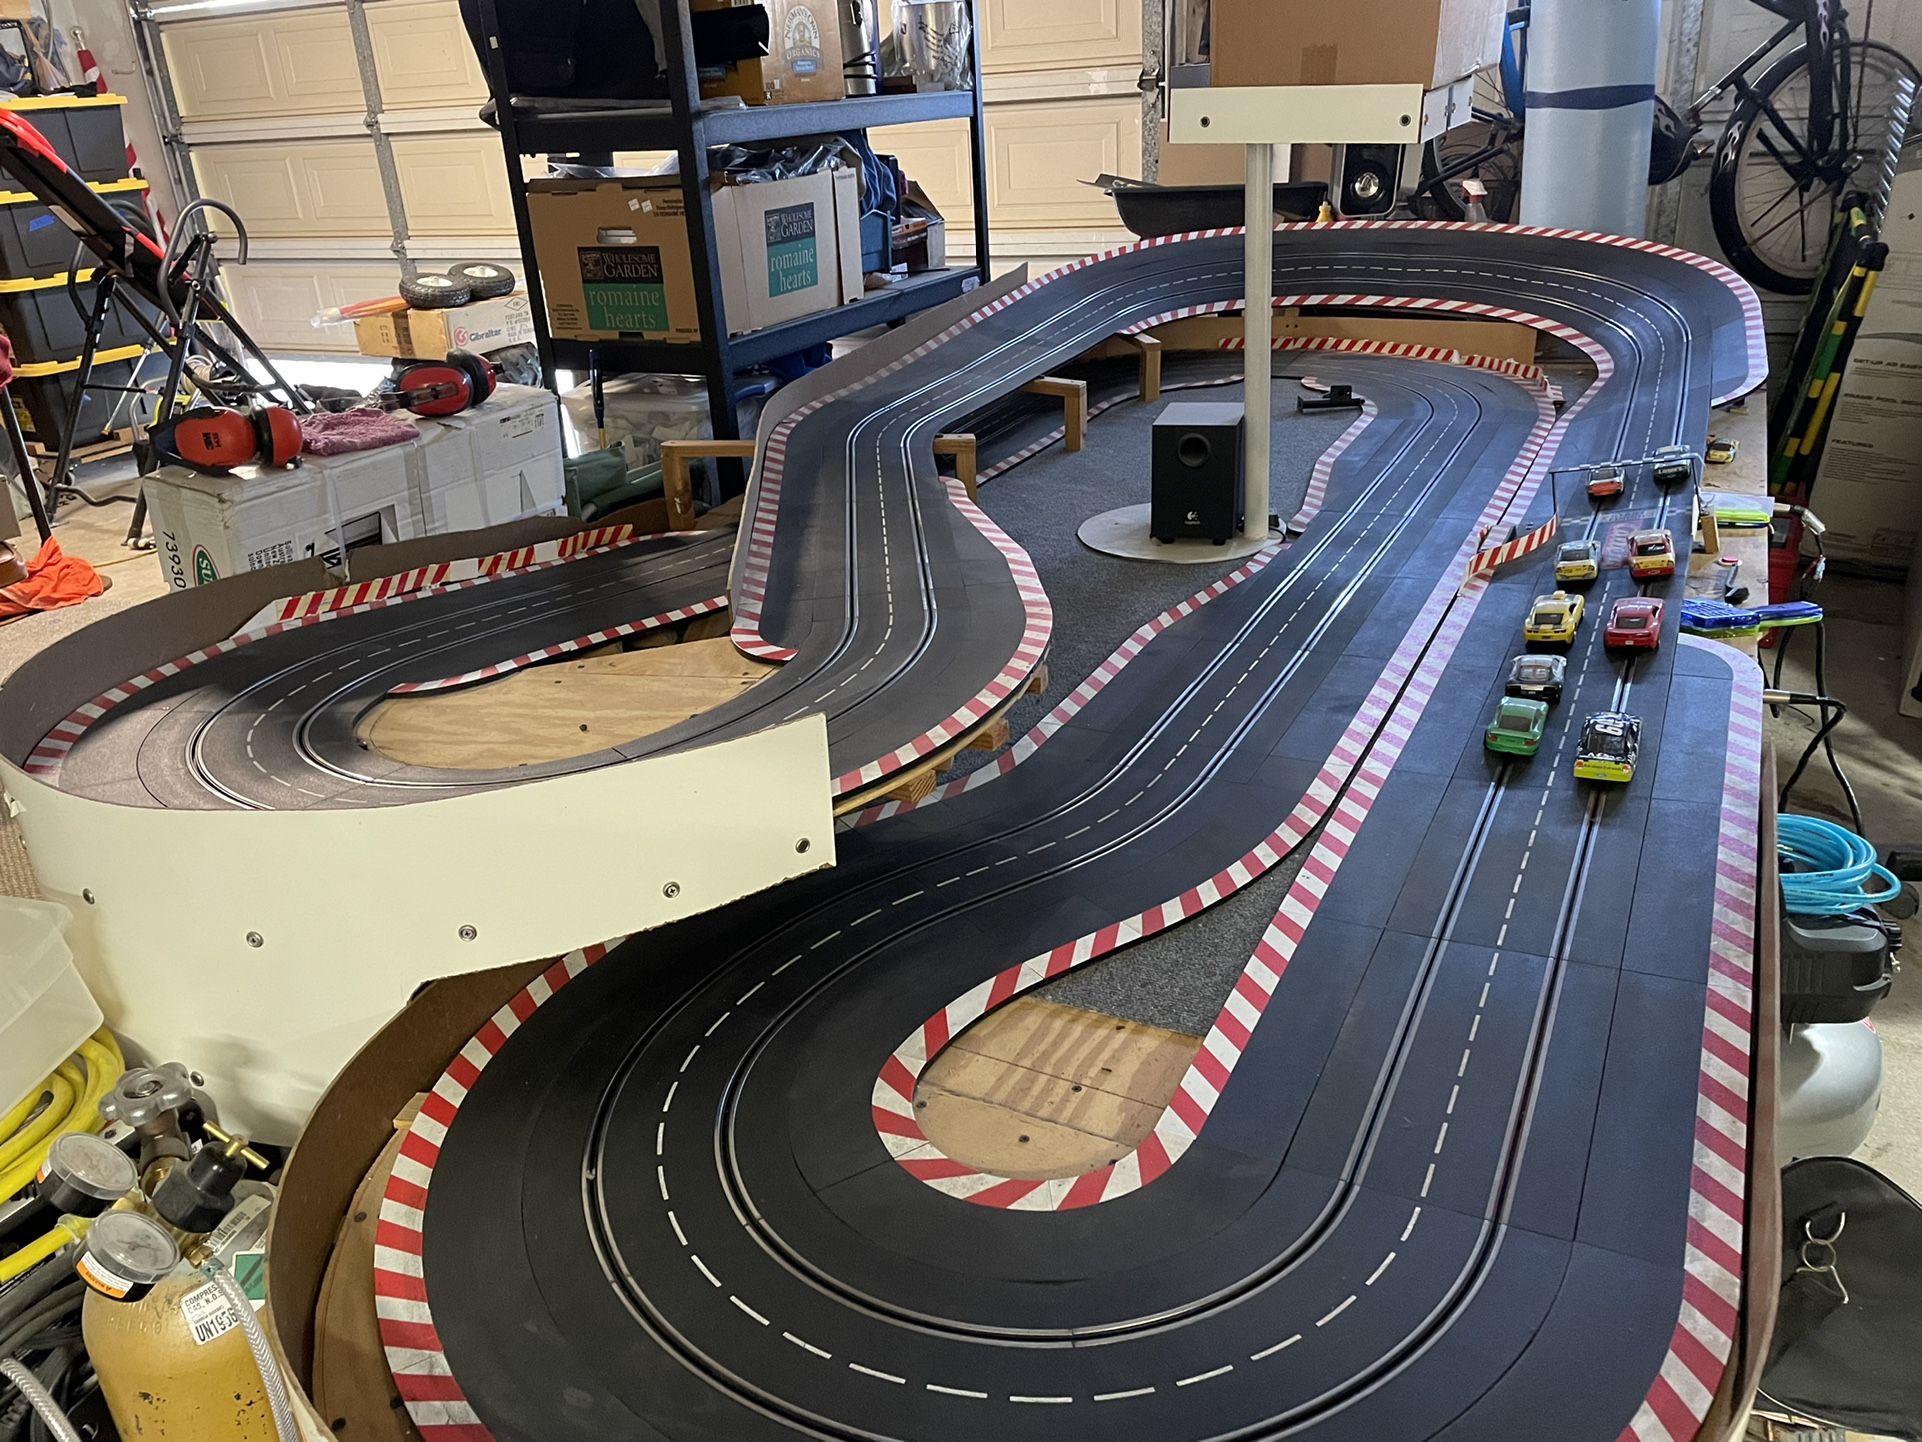 Carrera Slot Car Race Track for Sale in Lakeside, CA - OfferUp